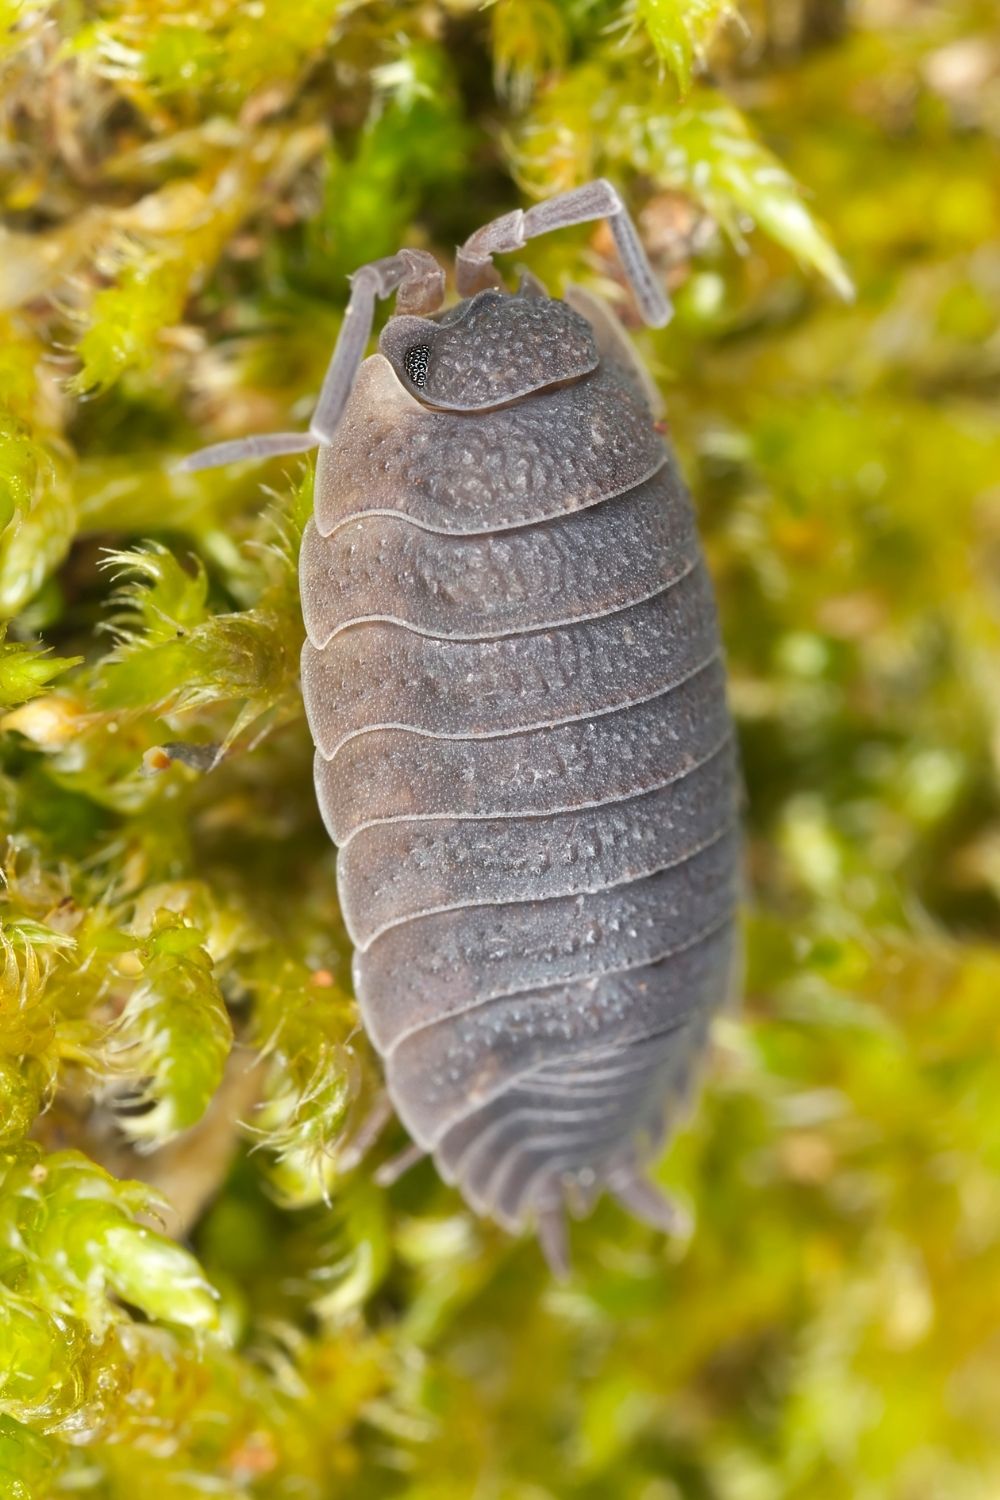 Most woodlouse species, including the powder orange isopods, live for an average of 3-4 years